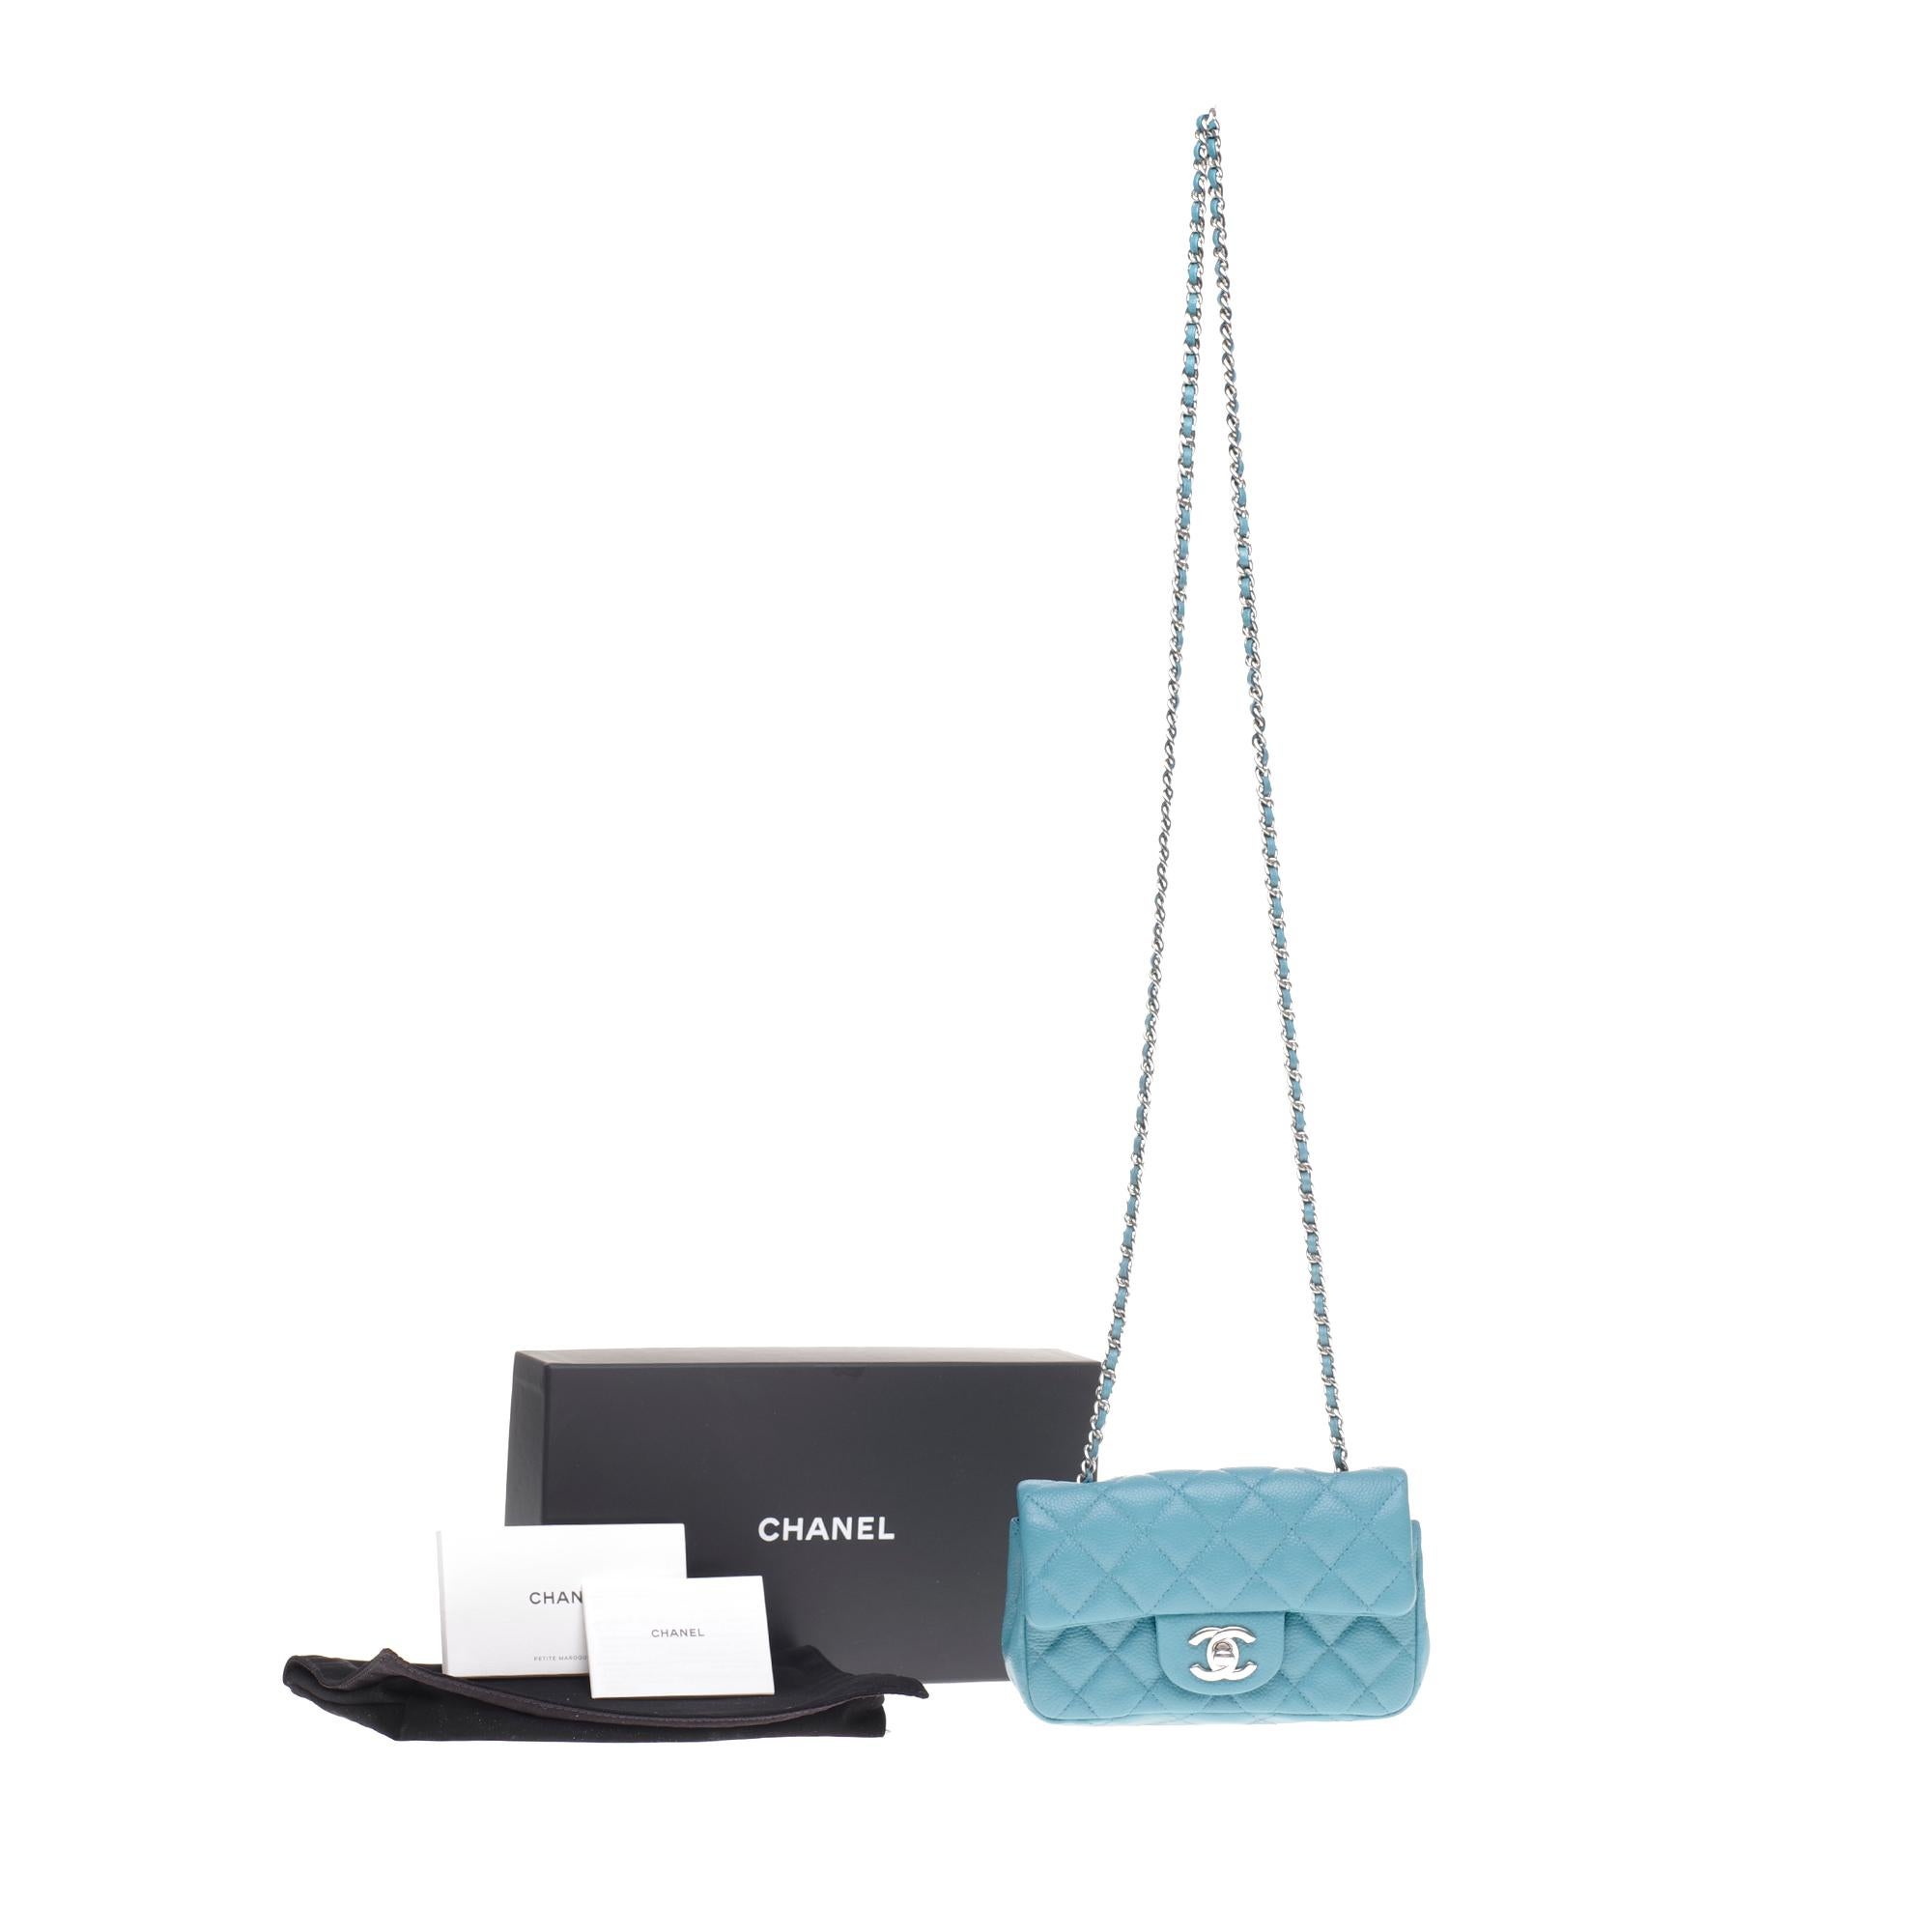 Stunning Mini Chanel shoulder bag in turquoise caviar leather, silver hardware 5